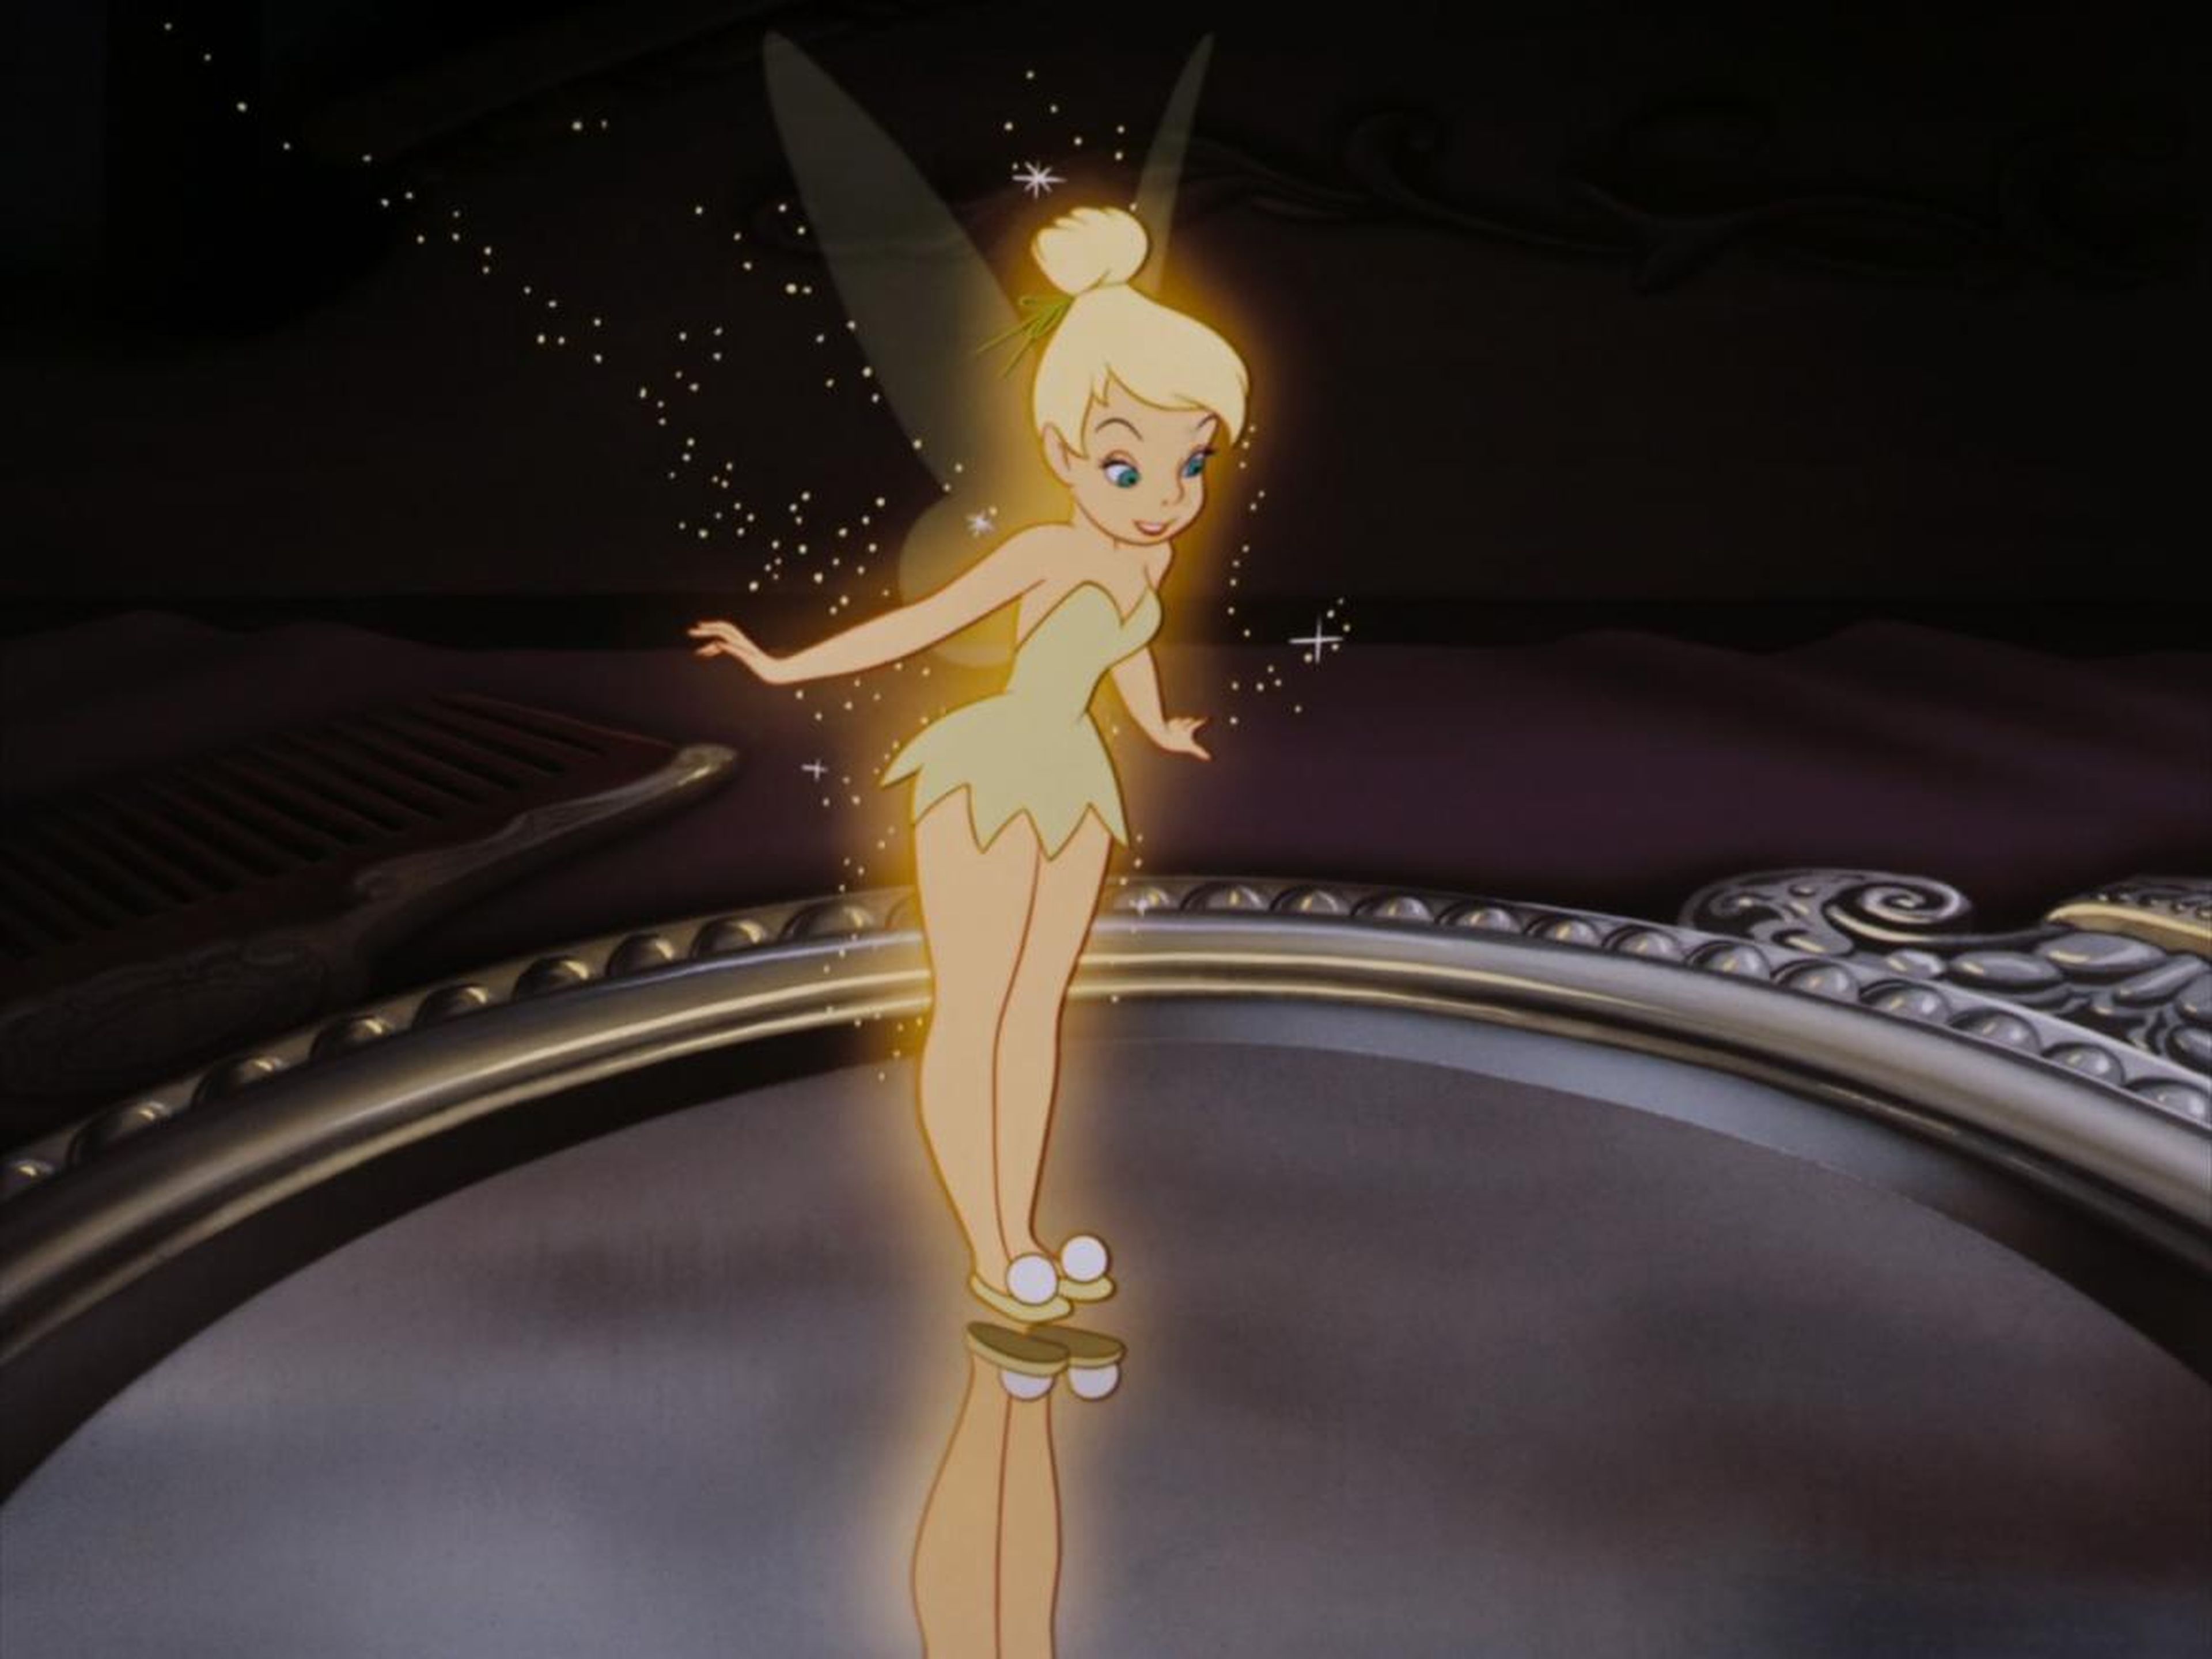 Tinker Bell from "Peter Pan."